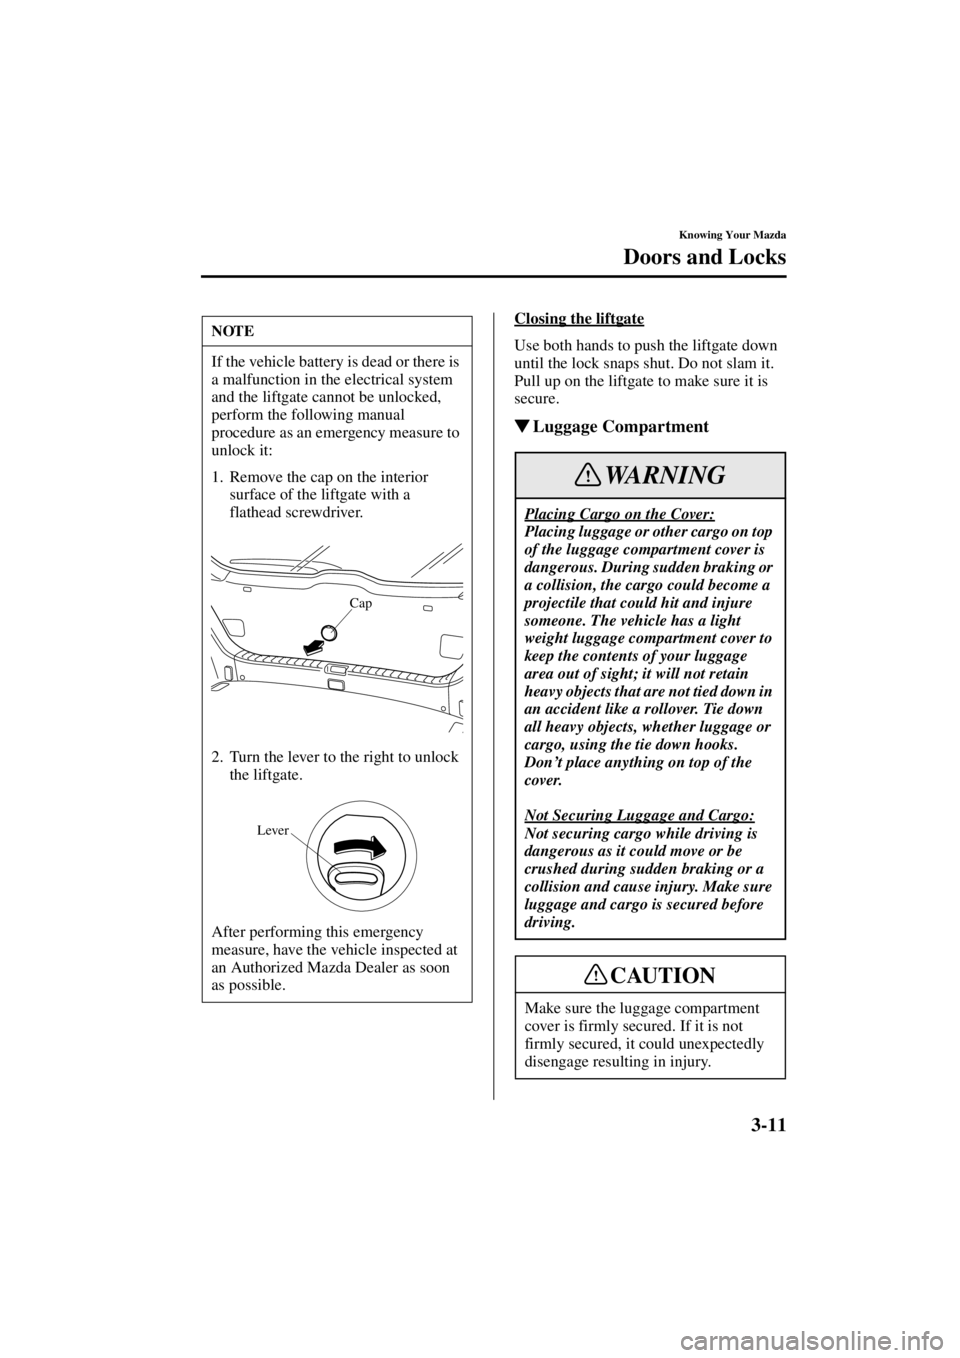 MAZDA MODEL 3 5-DOOR 2004 User Guide 3-11
Knowing Your Mazda
Doors and Locks
Form No. 8S18-EA-03I
Closing the liftgate
Use both hands to push the liftgate down 
until the lock snaps shut. Do not slam it. 
Pull up on the liftgate to make 